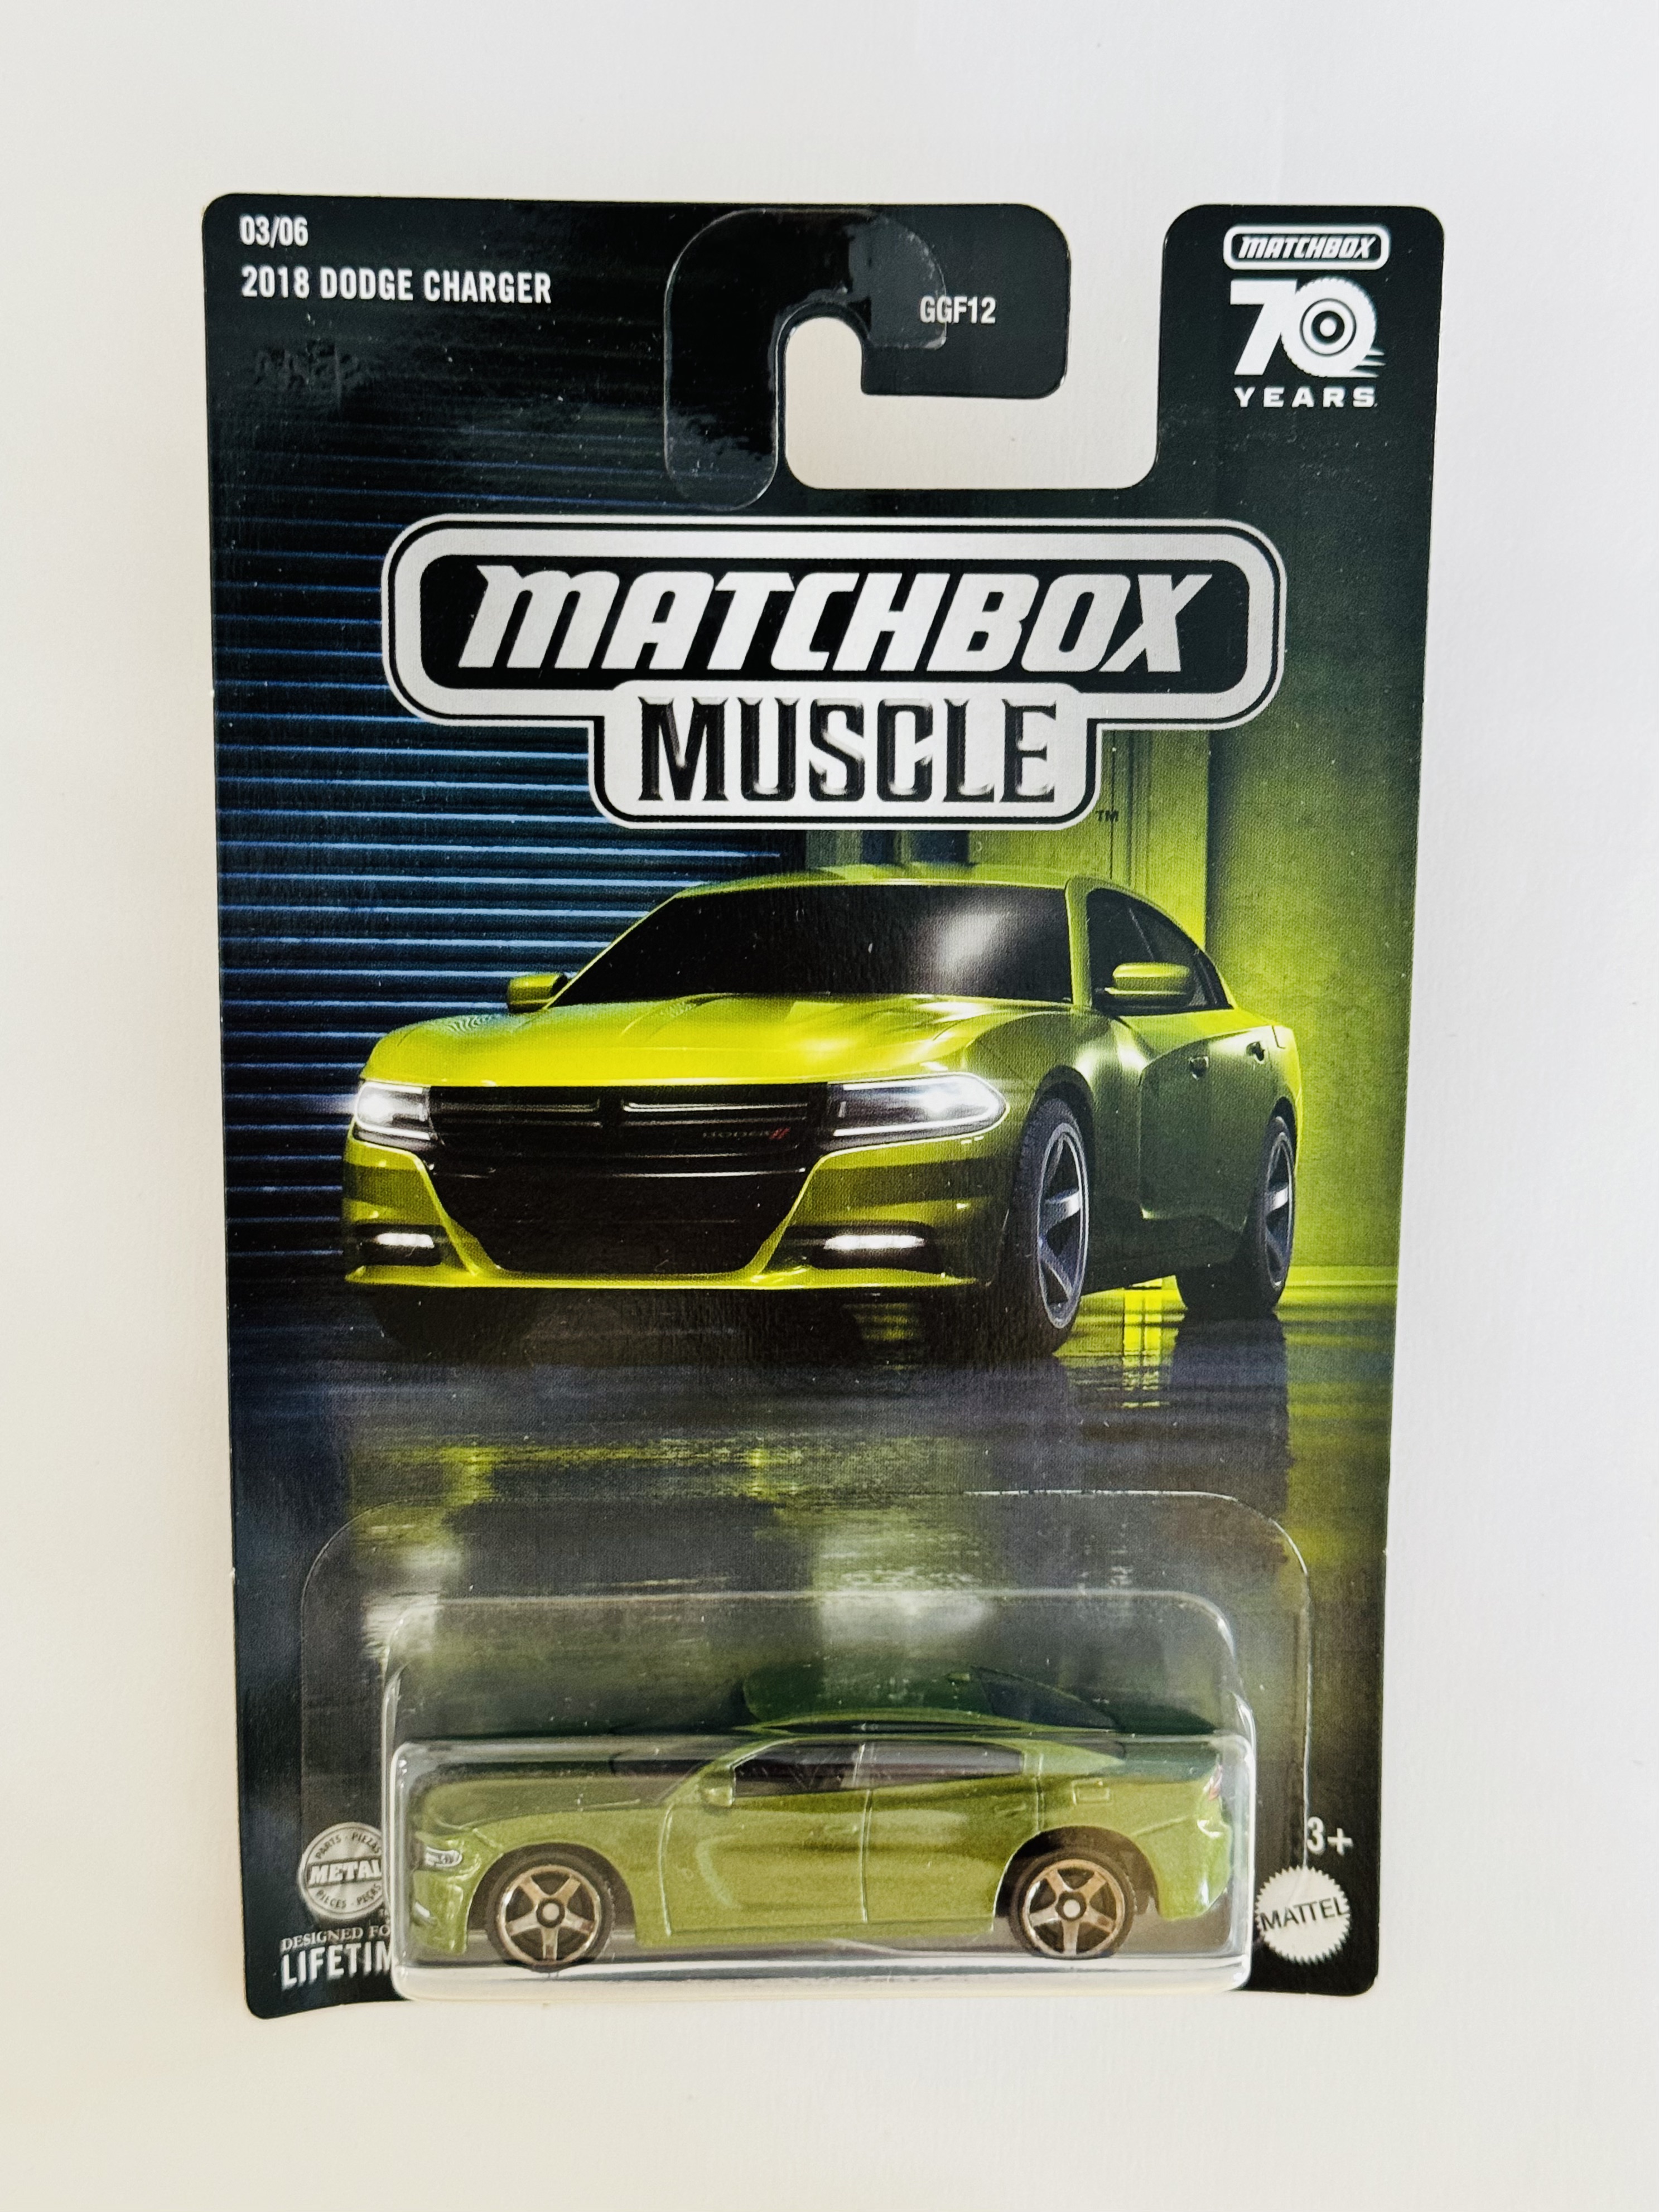 Matchbox Muscle 2018 Dodge Charger